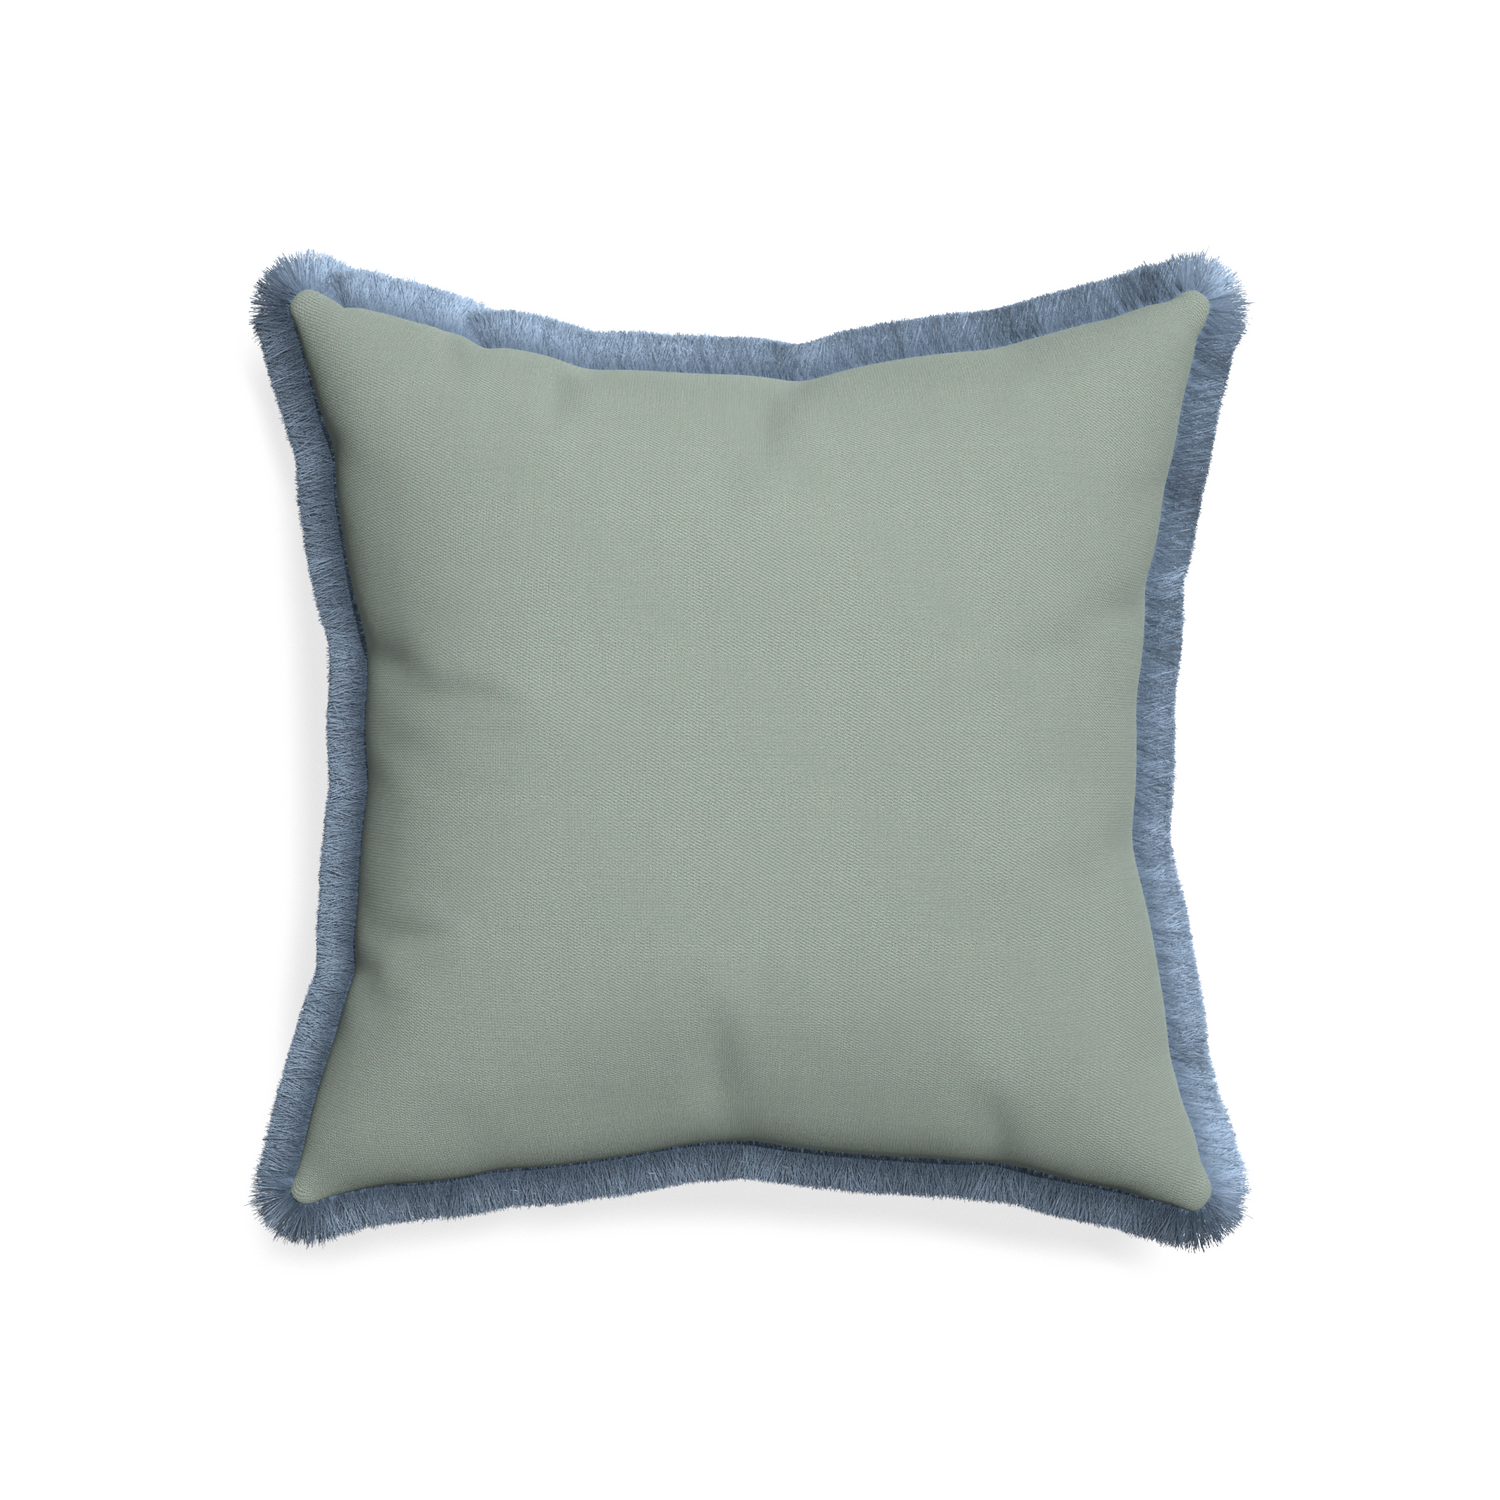 20-square sage custom pillow with sky fringe on white background